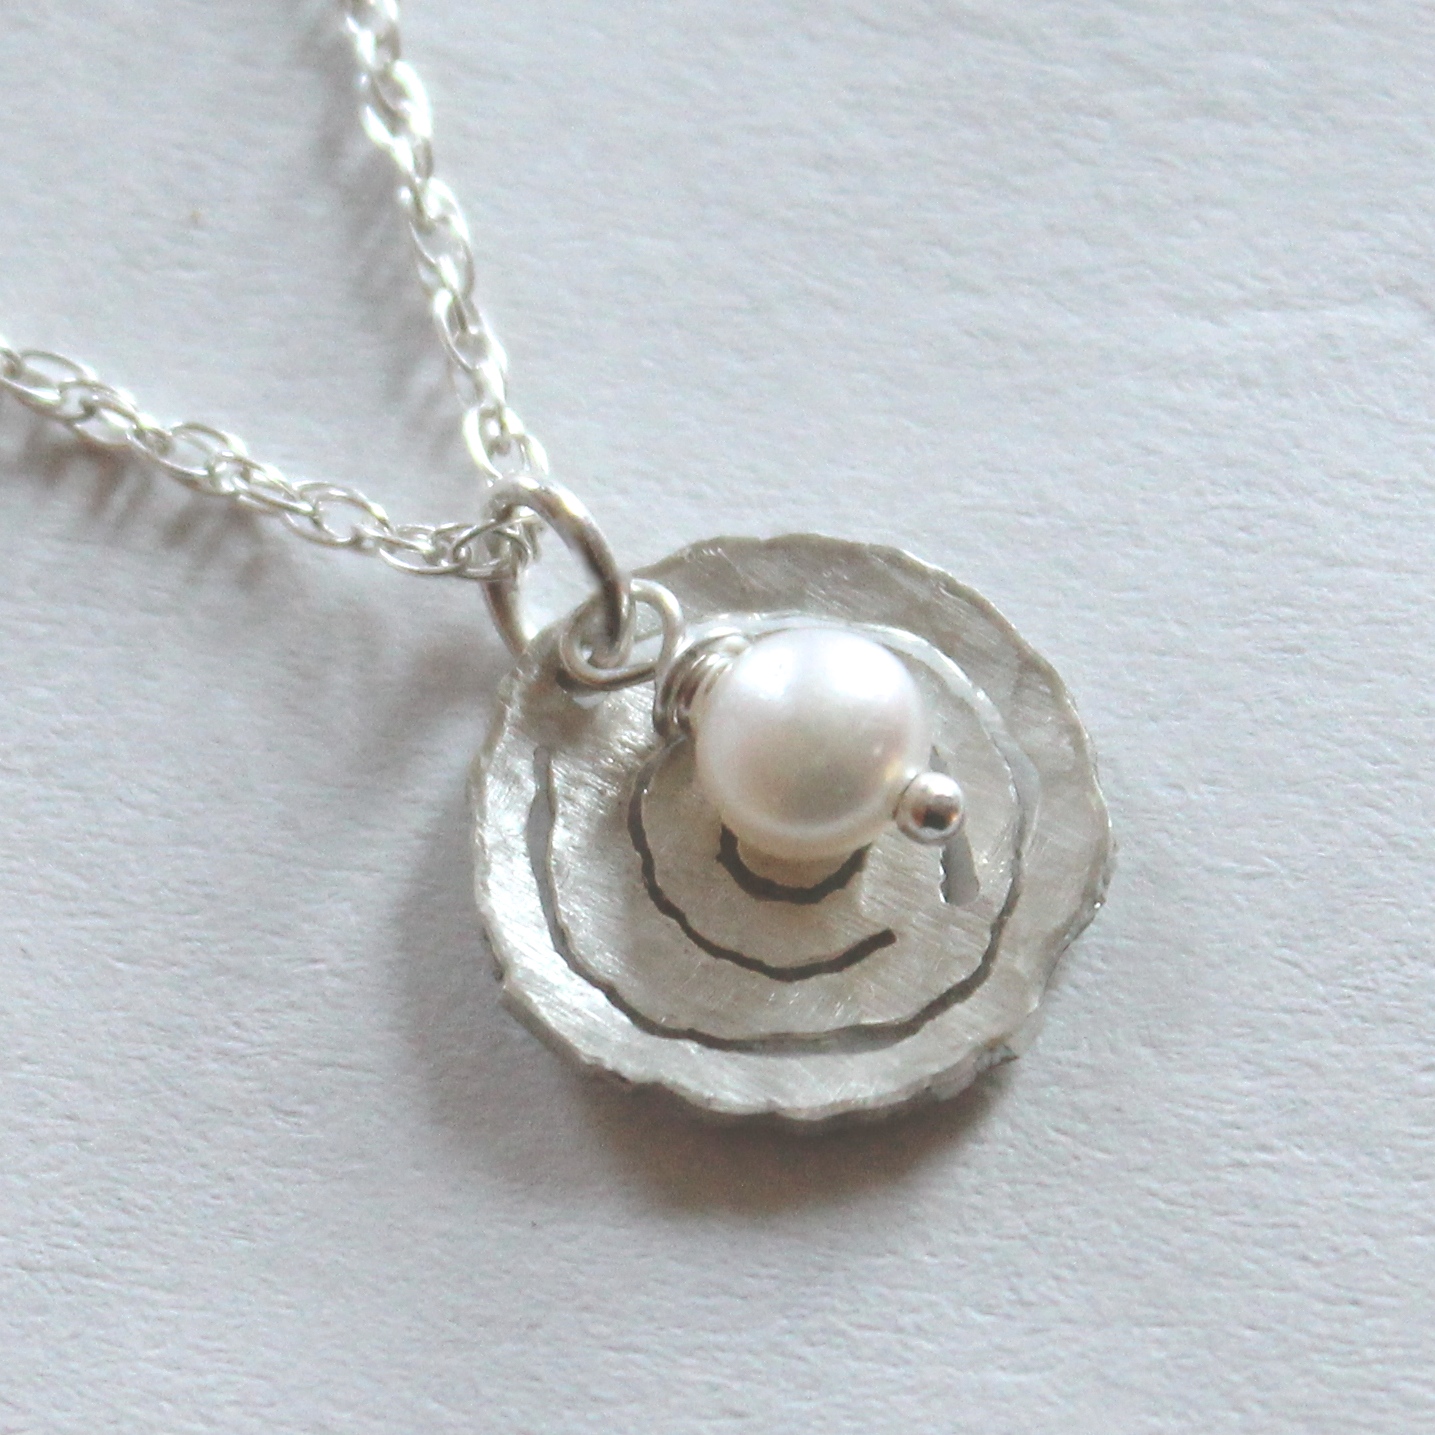 Raindrop Pendant in Sterling Silver and Pearl